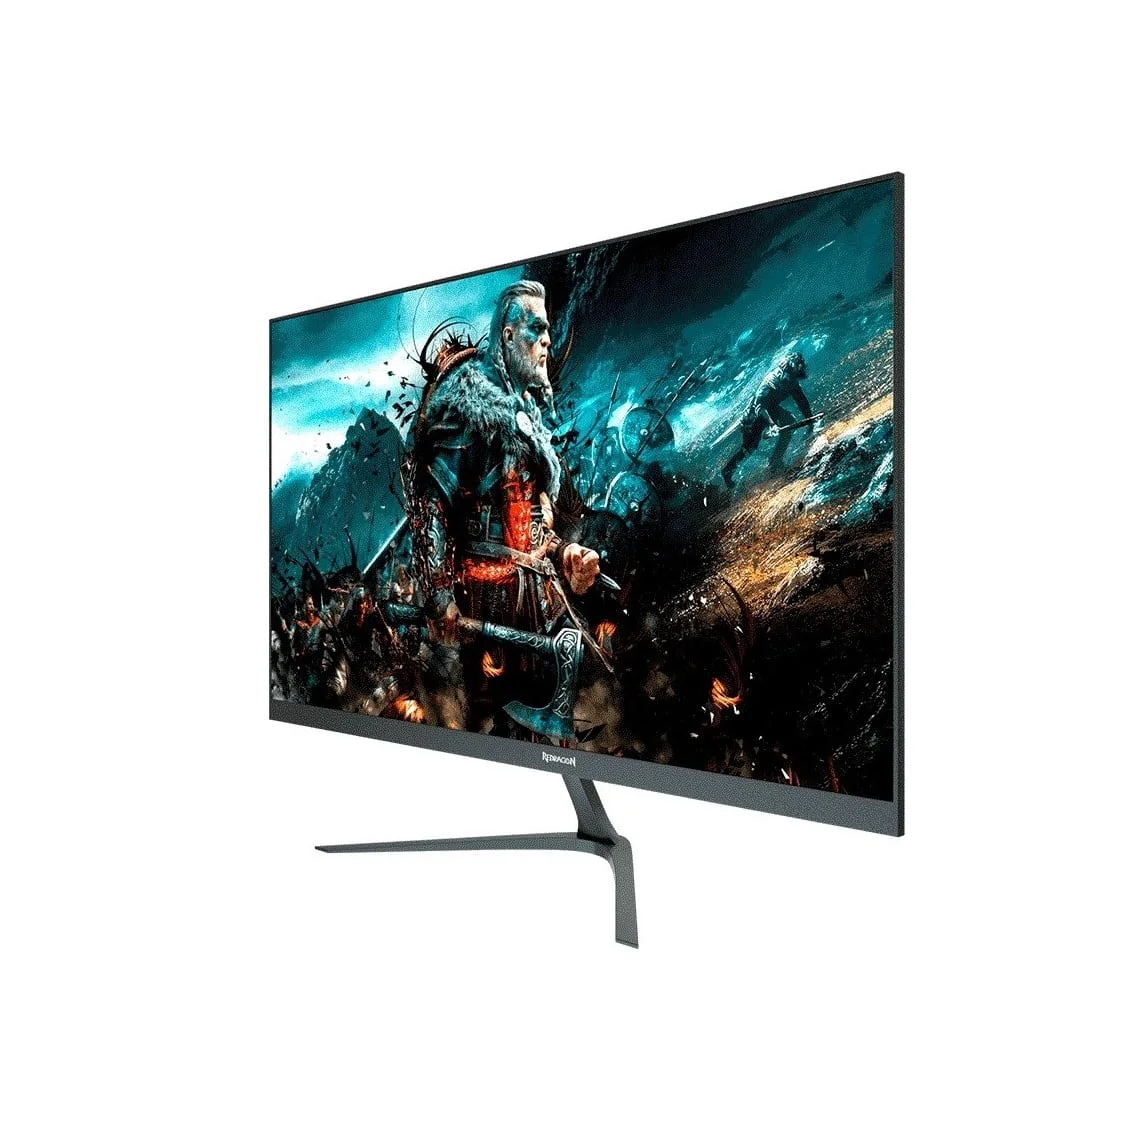 D049C02B901838F08A7306C106Ce6C00 Hi Redragon &Lt;H1&Gt;Redragon Emerald 27” Gaming Monitor - Gm270F165&Lt;/H1&Gt; &Lt;Span Style=&Quot;Font-Size: 16Px;&Quot;&Gt;A Standard Monitor Is Just The Visual Output Of The Computing Process. A Gaming Monitor, On The Other Hand, Is An Instrument That Must Be Capable Of Representing An Almost Infinite Beam Of Light, Color And Movement Graduations. To Serve Recreational And Competitive Play; To Exploit All The Graphic Power Of The Best Teams; To Show More, Faster And Better. That, At Least, Is The Mission That The Emerald Has Come To Fulfill.&Lt;/Span&Gt; Gaming Monitor Redragon Emerald 27” Gaming Monitor